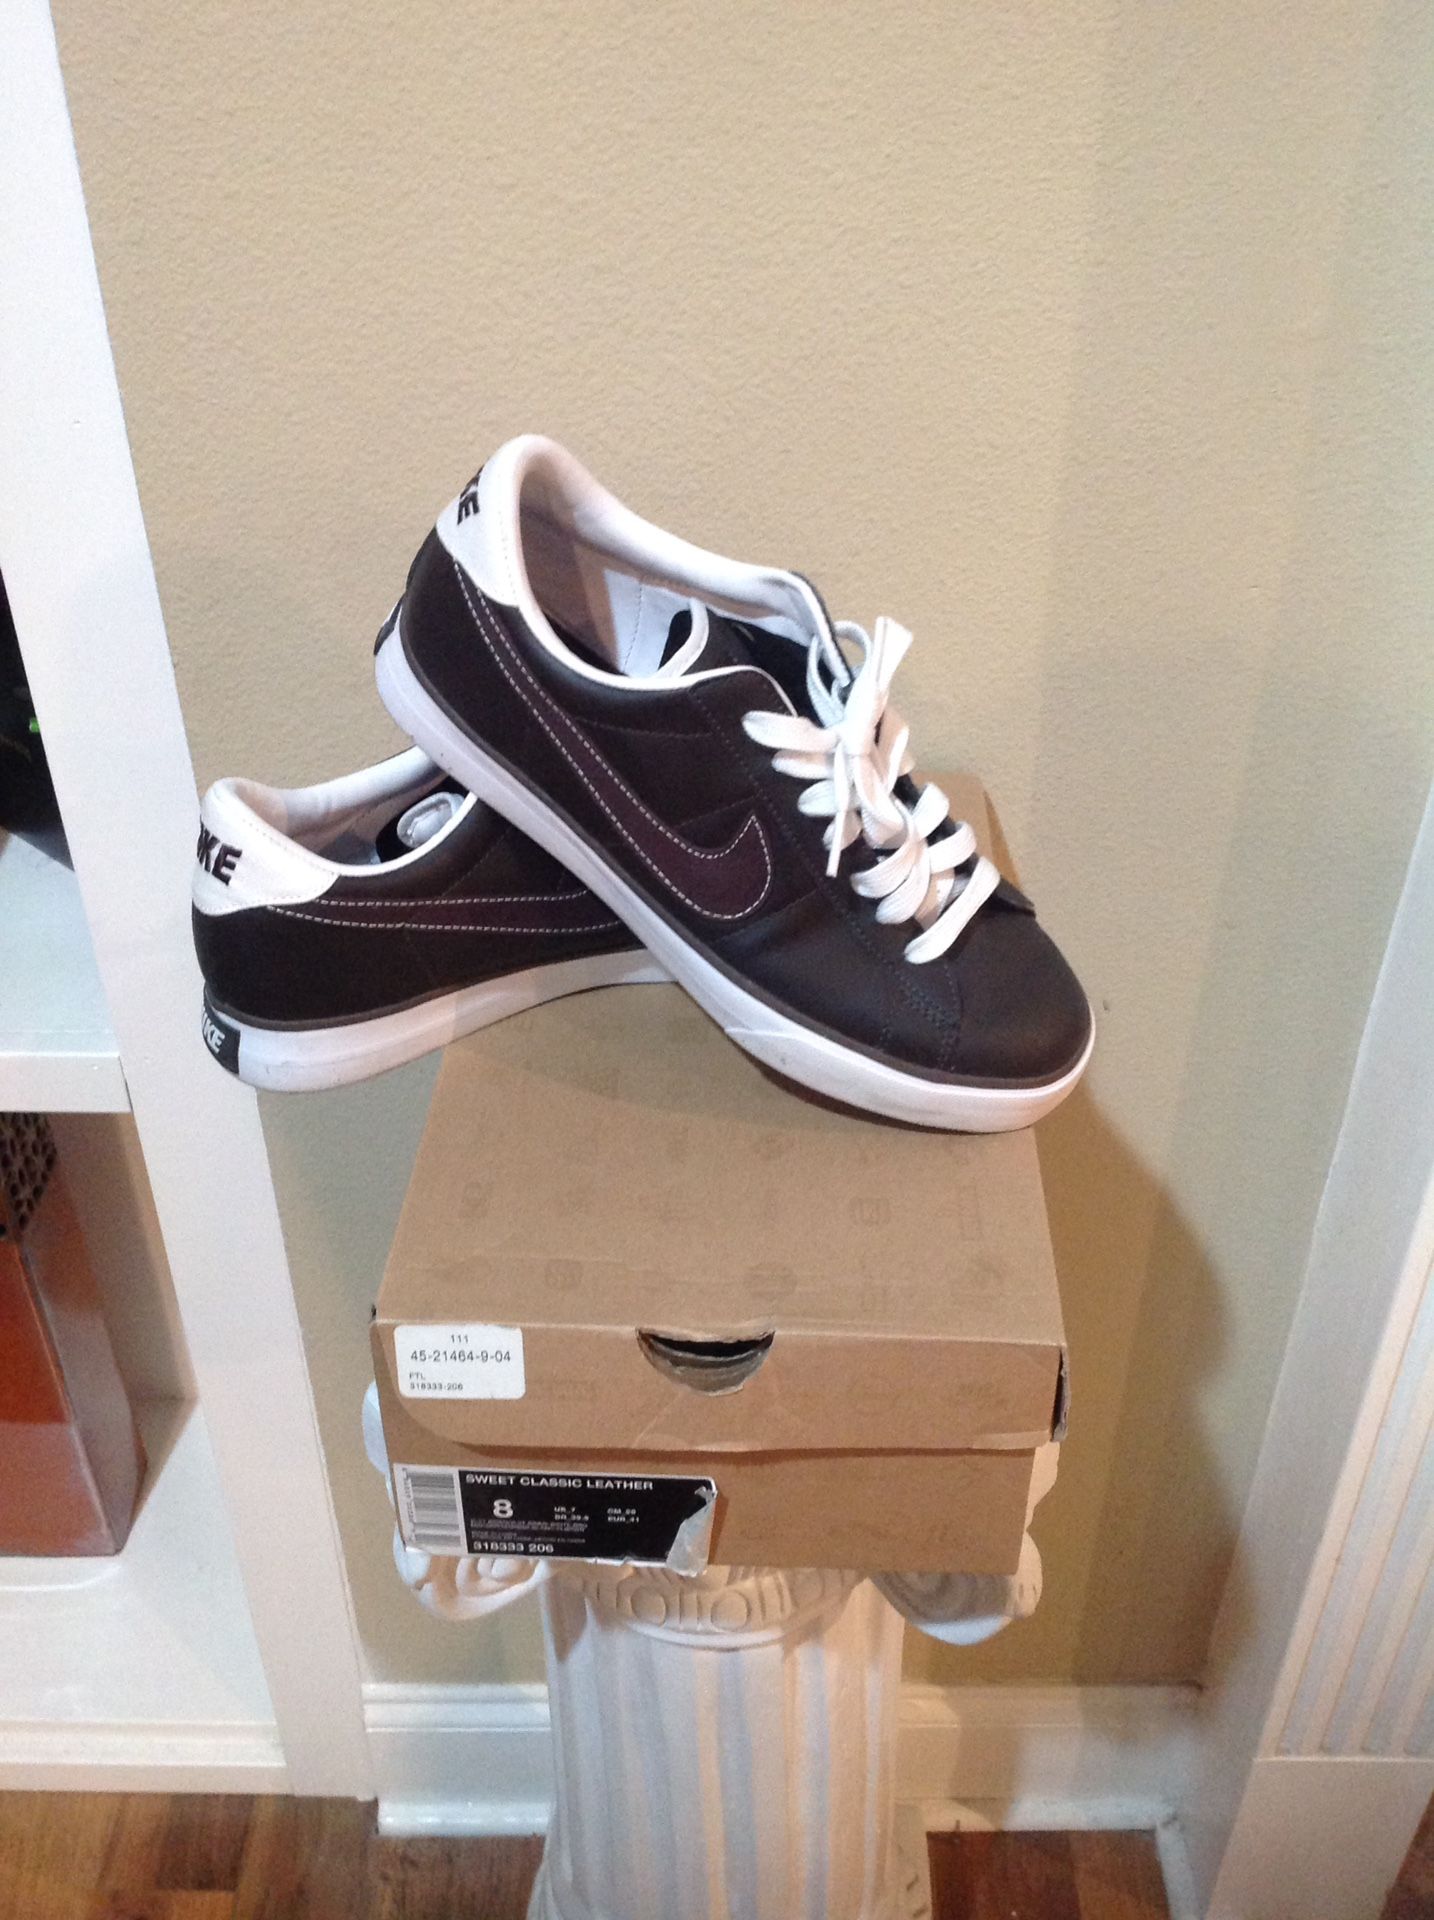 Like new: Men's NIKE brown leather tennis shoes